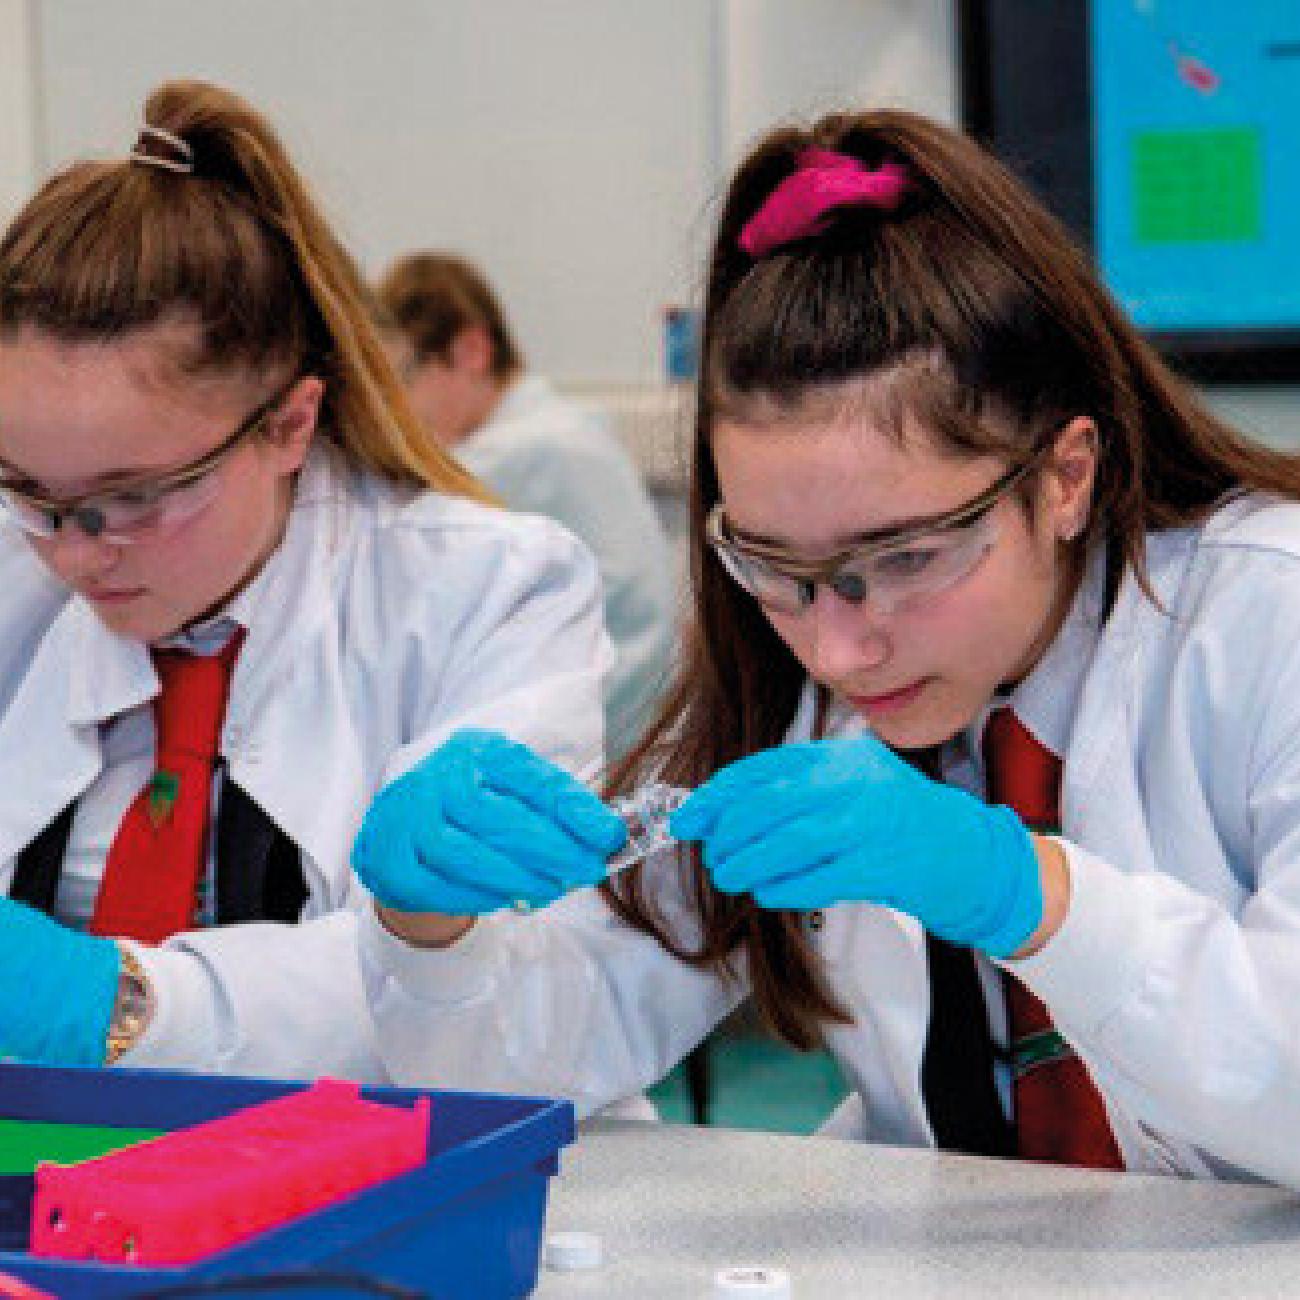 Two school students taking part in a science experiment at their desks, as part of the LifeLab programme.